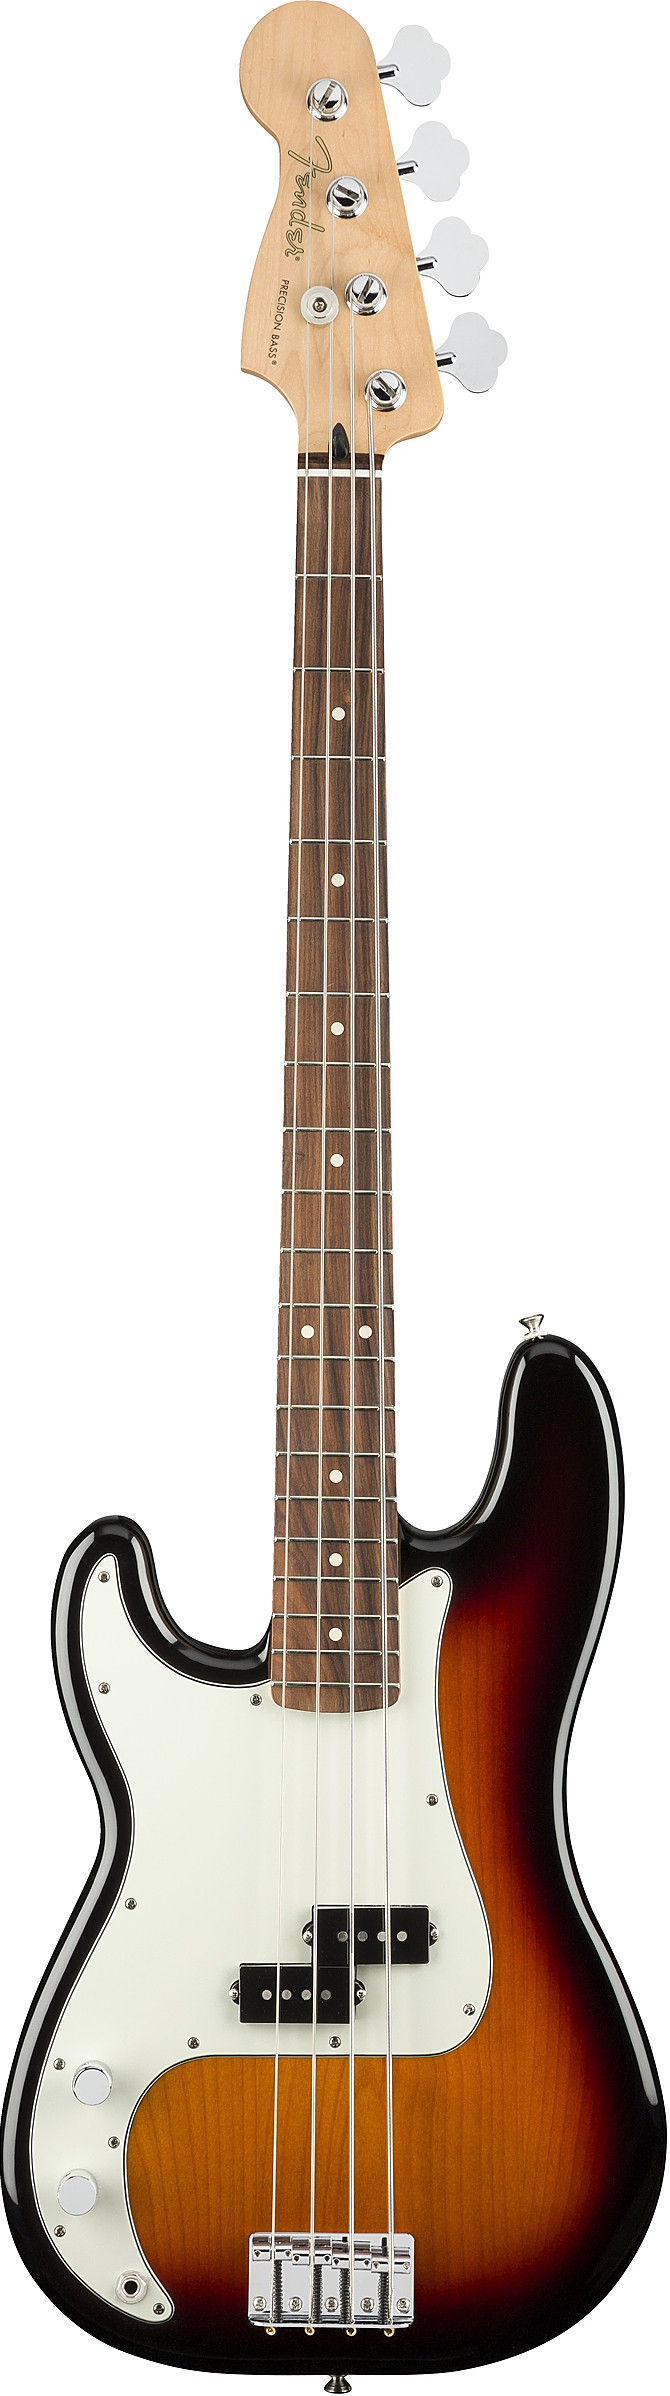 Player Precision Bass Left-Handed by Fender